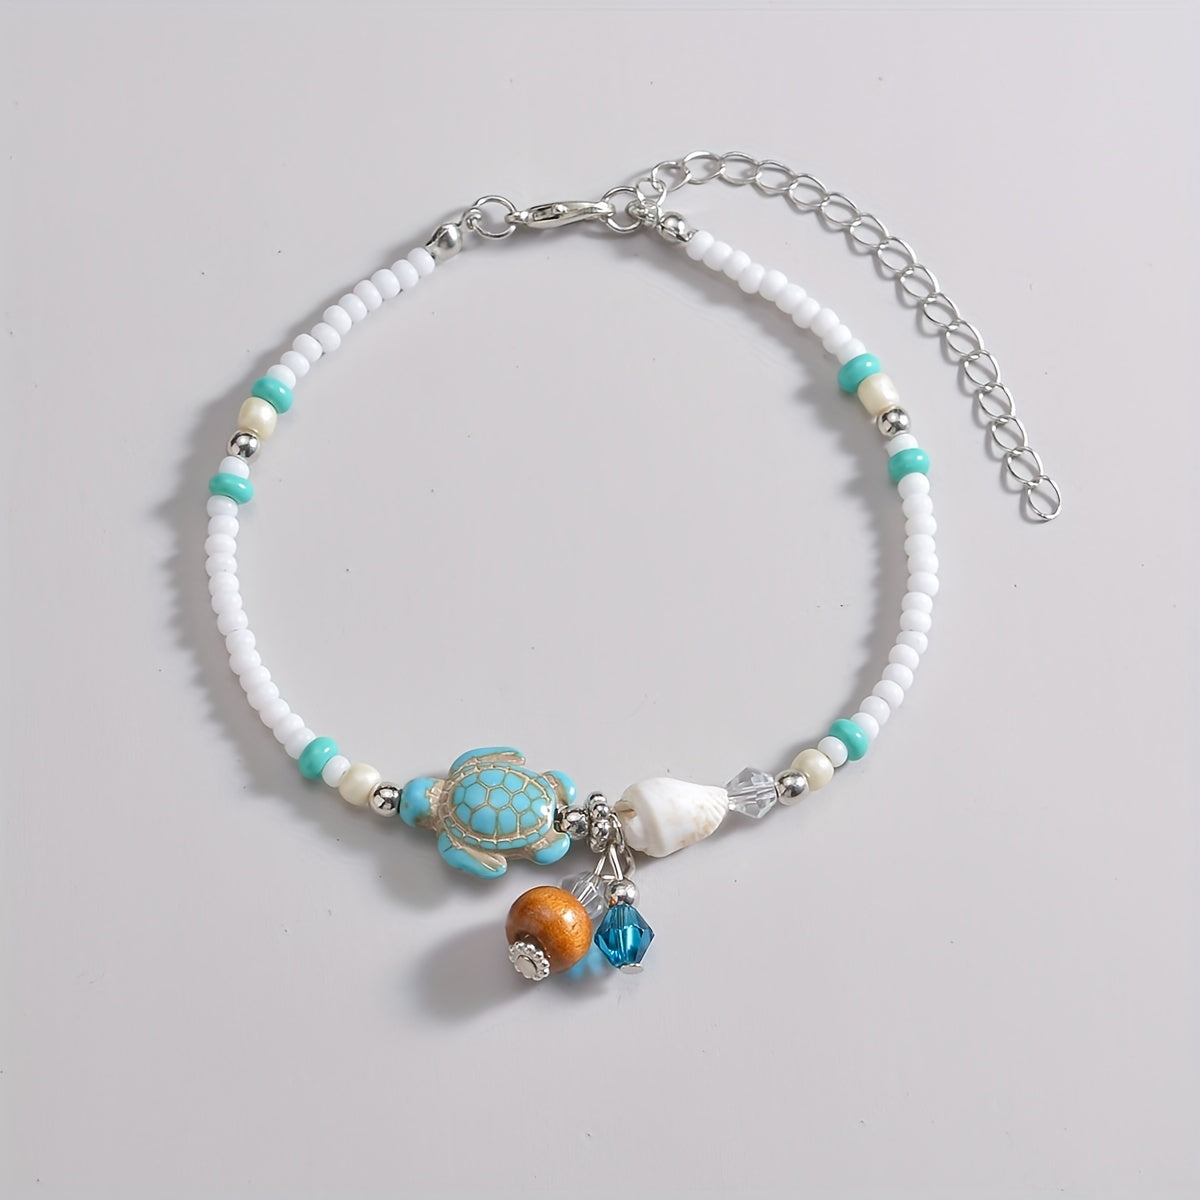 Vintage Turquoise Turtle Shape Beaded Anklet With Mini Rice Beads White Ocean Style Ankle Bracelet 1pc